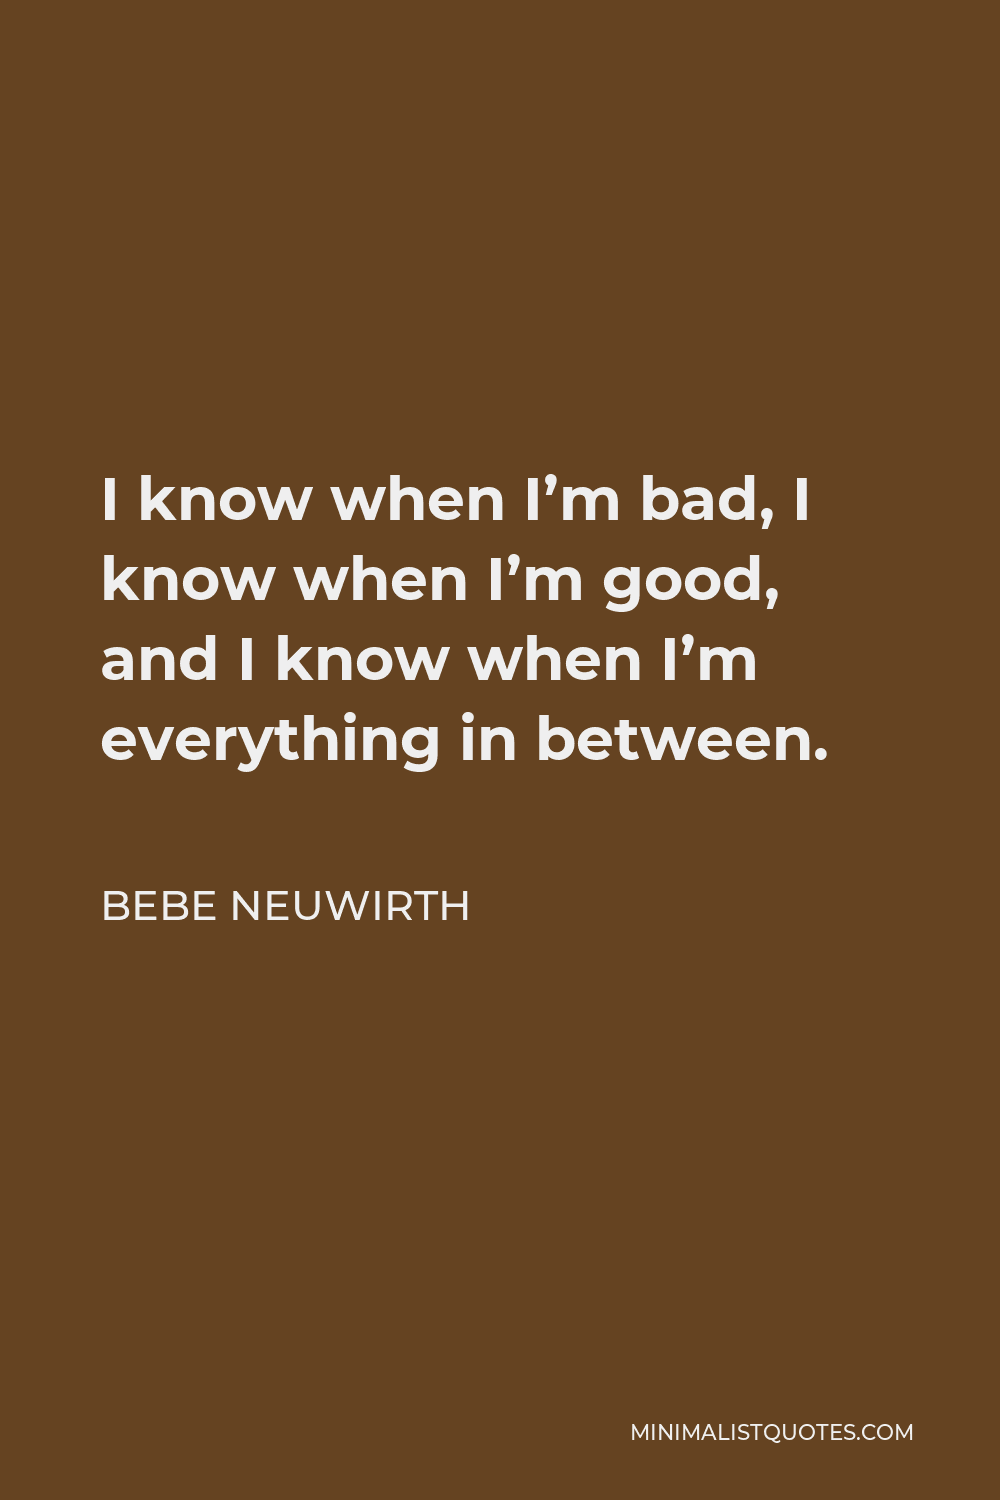 Bebe Neuwirth Quote - I know when I’m bad, I know when I’m good, and I know when I’m everything in between.